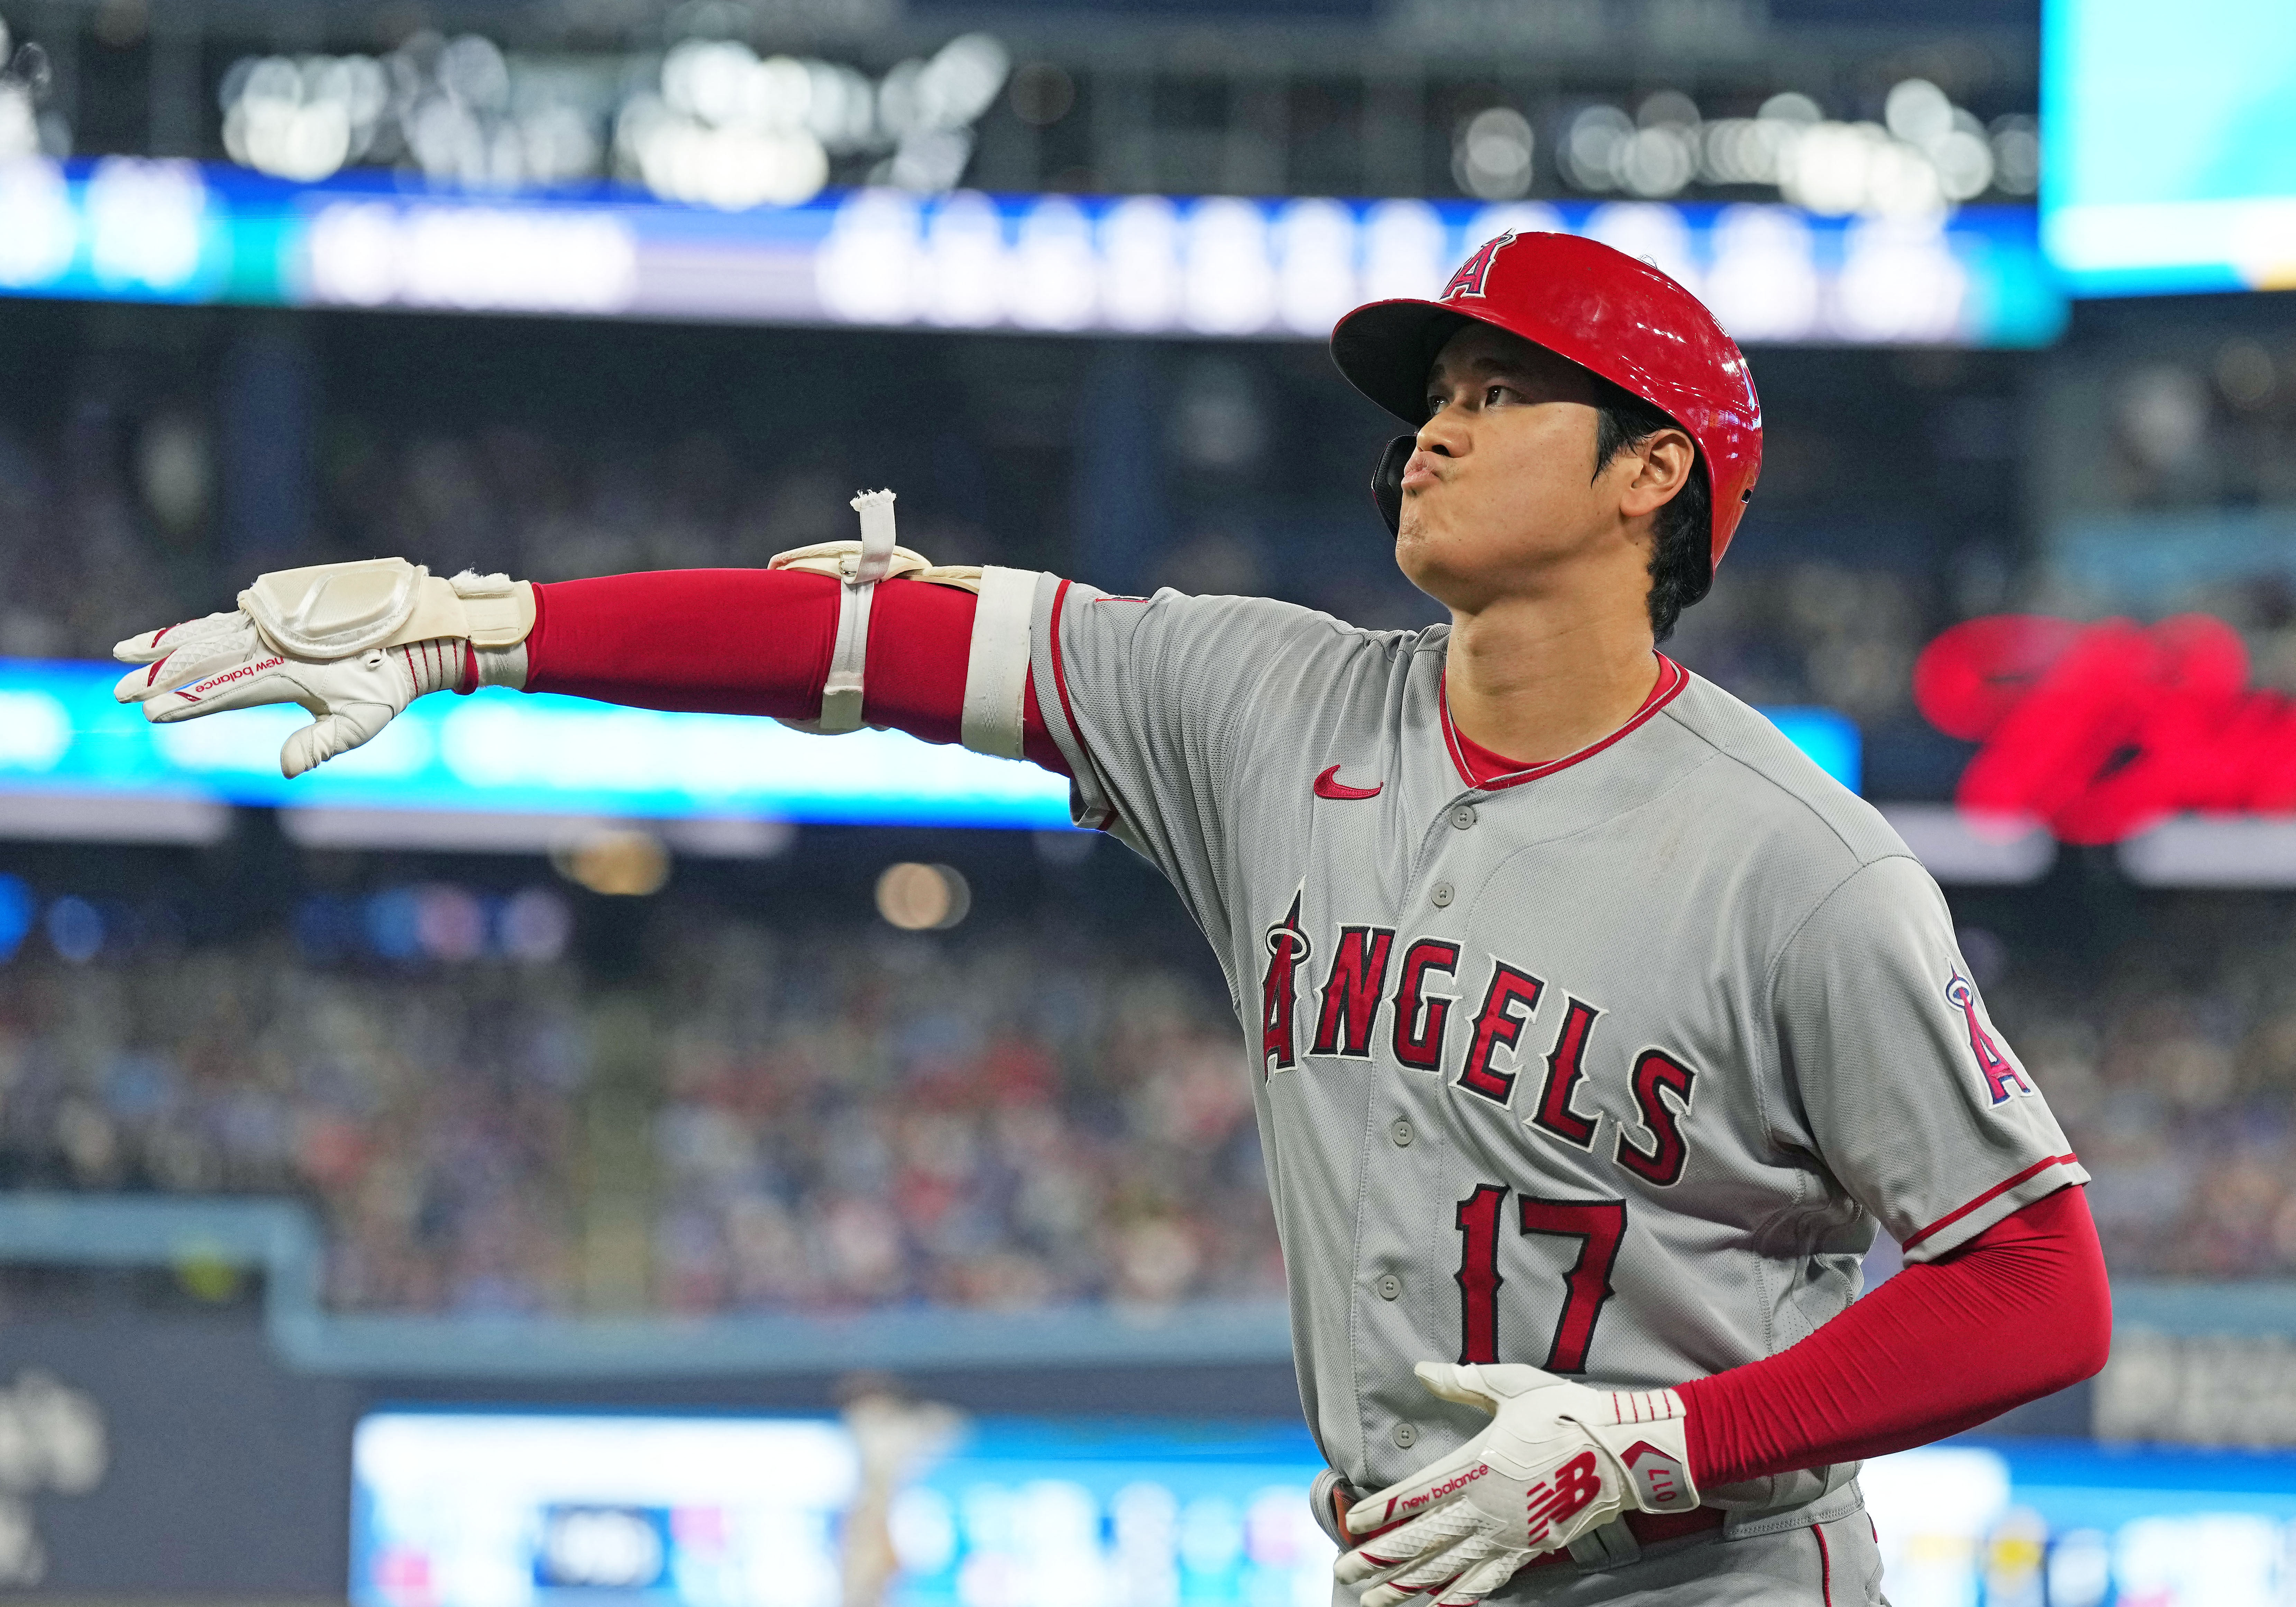 Shohei Ohtani's New Balance Glove Is as Special as He Is